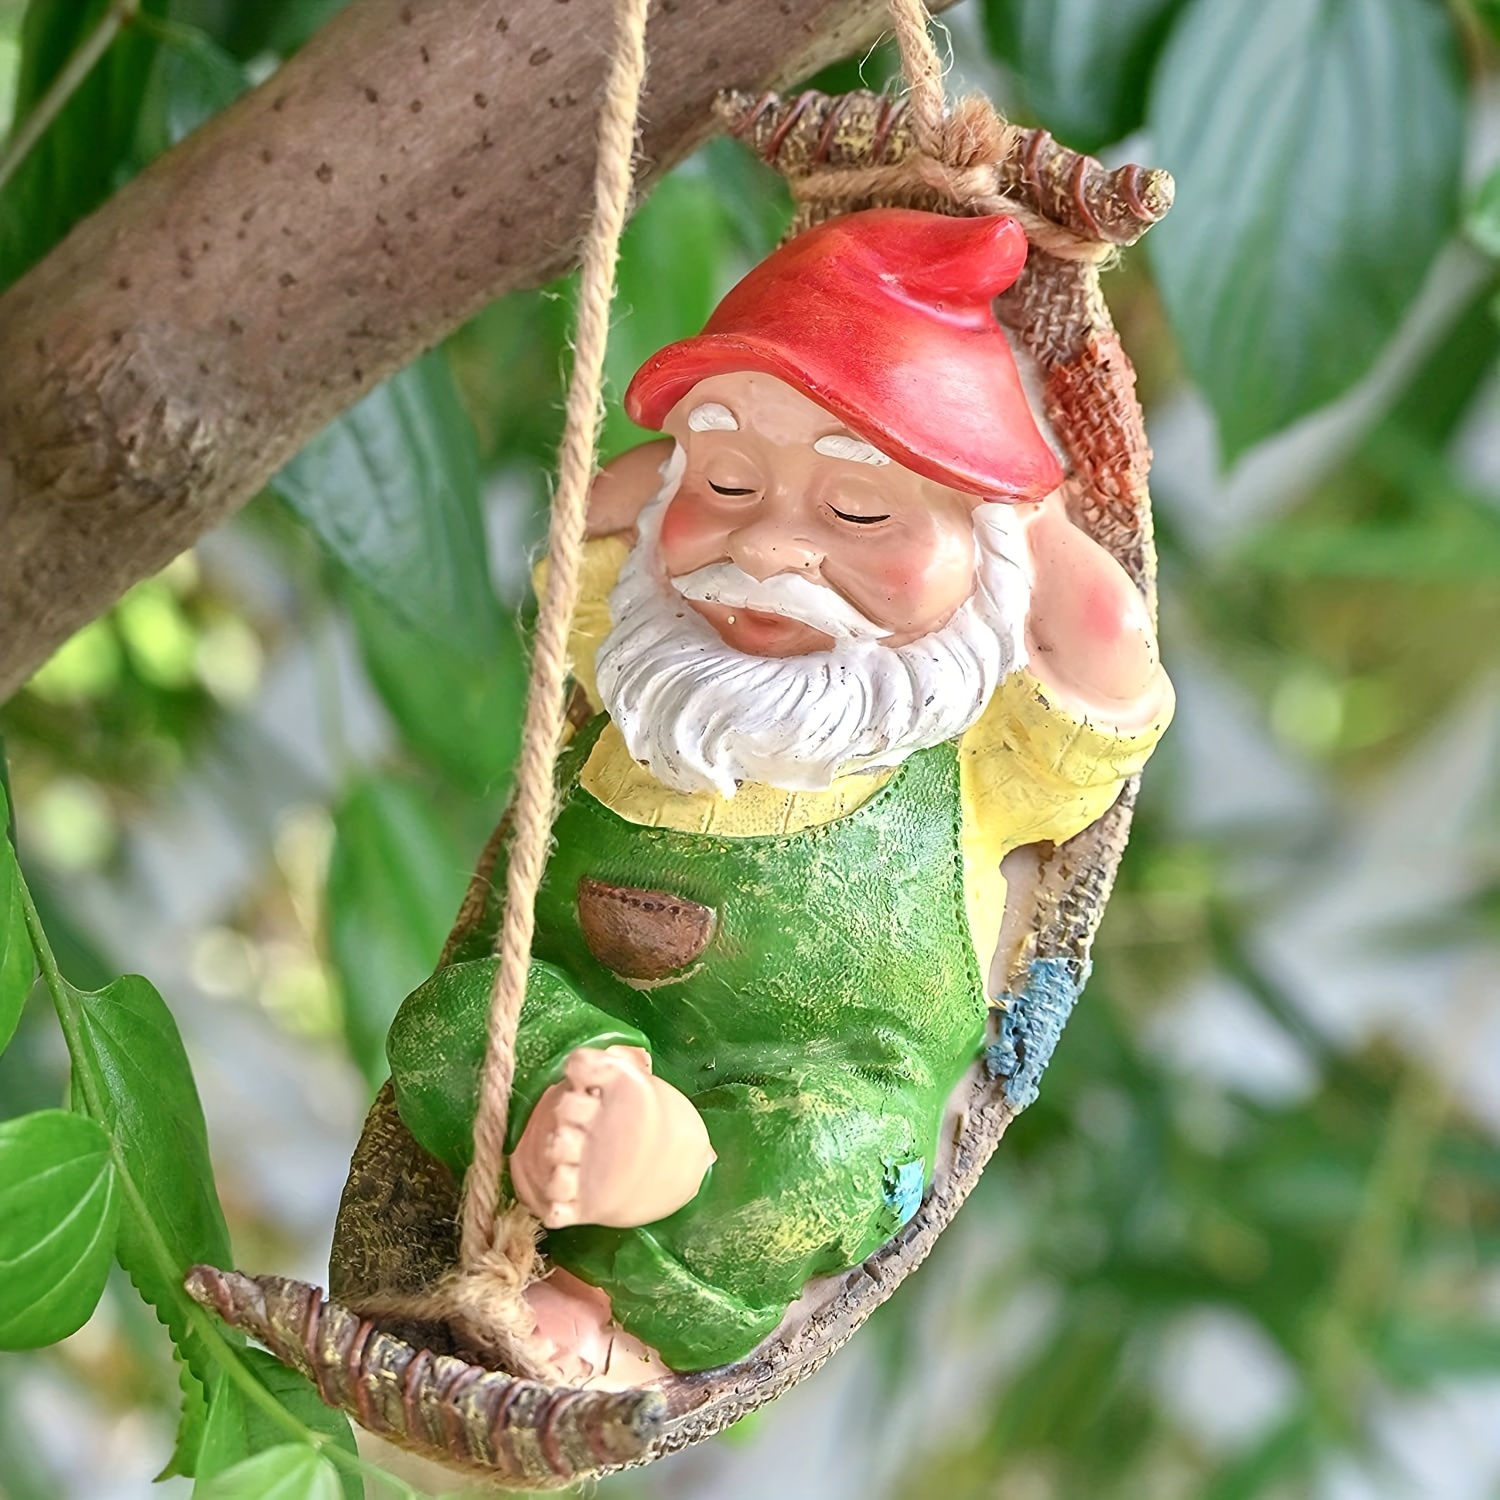 

1pc Cute Garden Gnomes Decorations For Yard Hanging Statues Outdoor Gifts, Sleepy Gnome In Swing Leaf Hammock Resin Tree Ornaments Figurines For Stump Branch Lawn Patio Decor